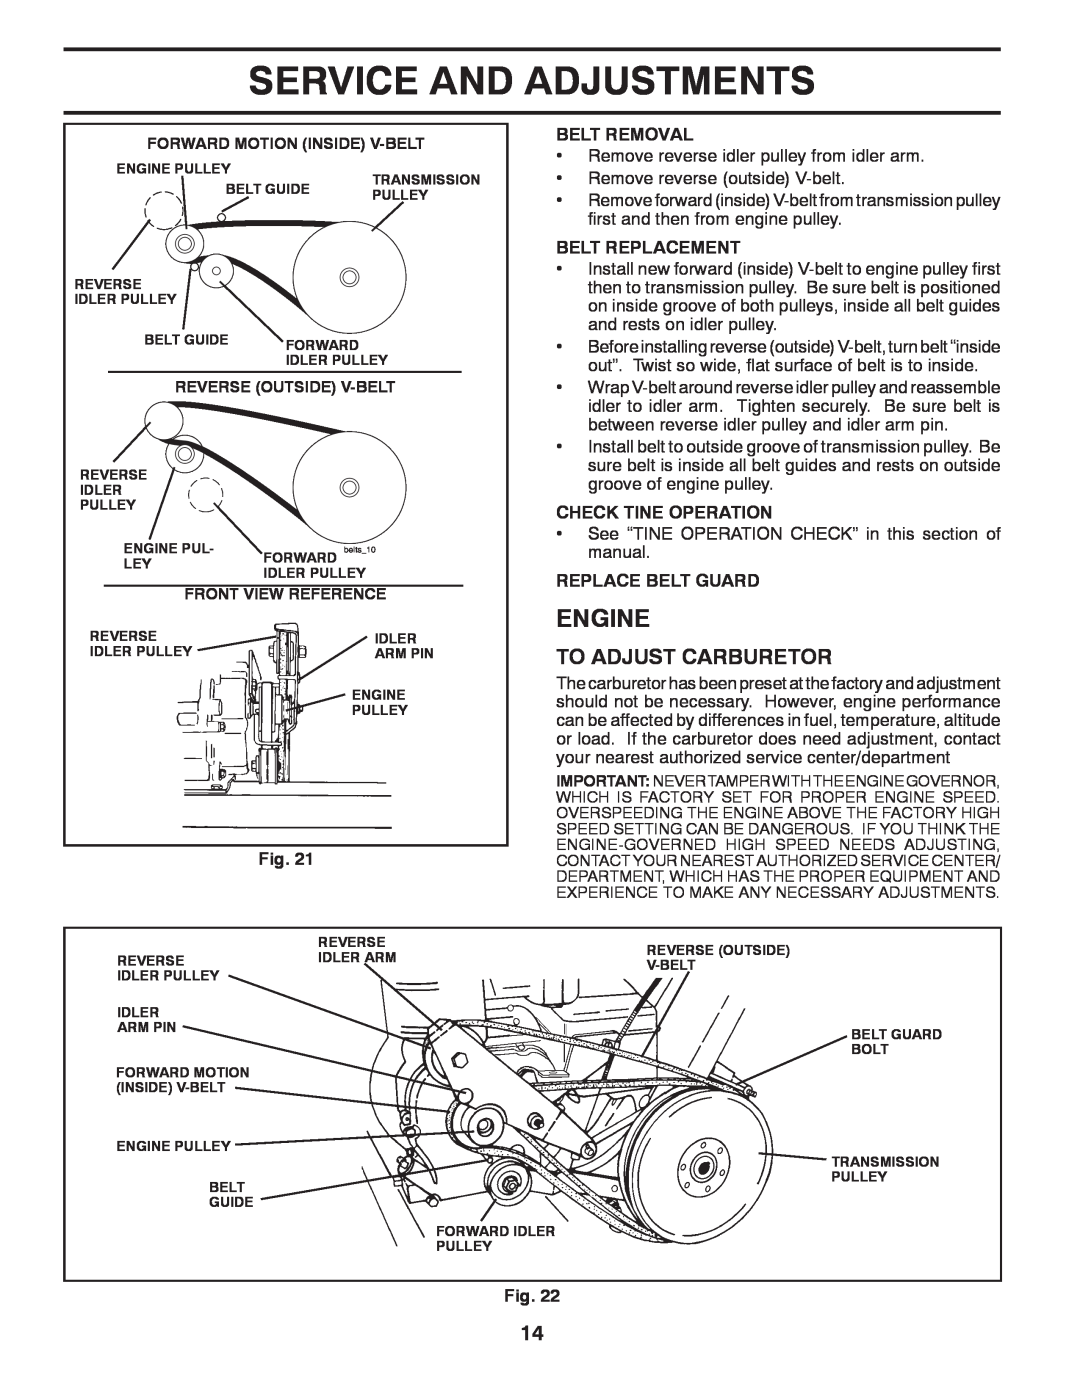 McCulloch 96081000900 manual To Adjust Carburetor, Belt Removal, Belt Replacement, Check Tine Operation, Replace Belt Guard 